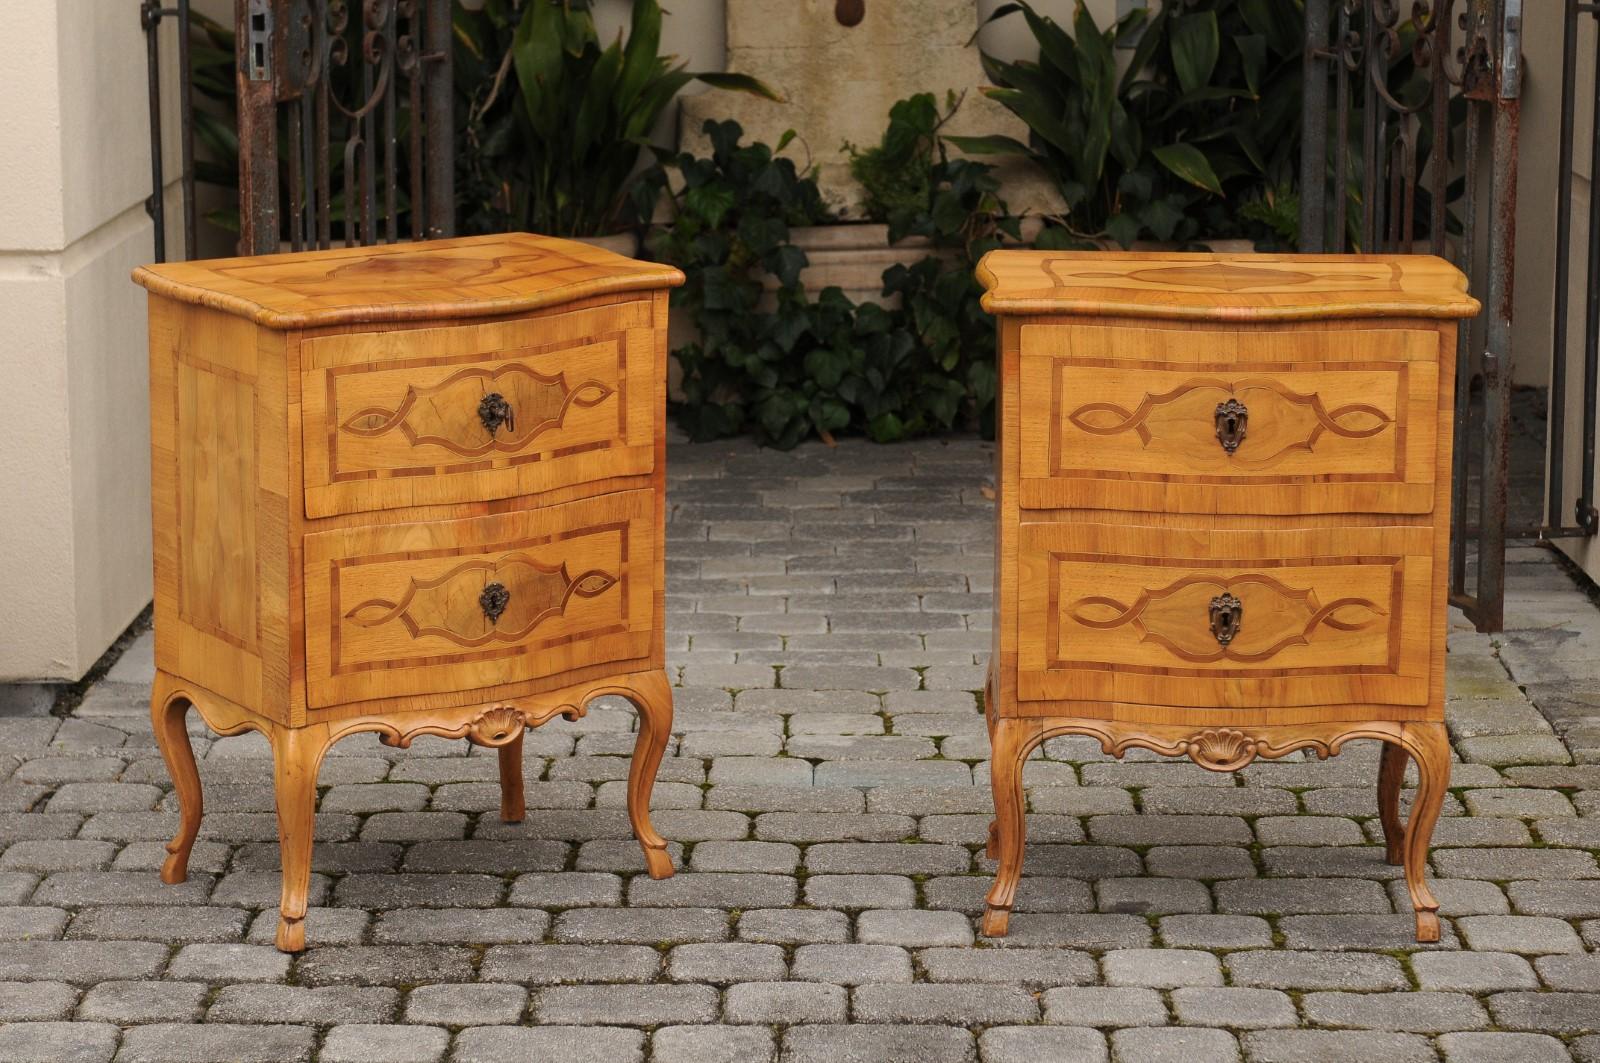 A pair of French Louis XV style walnut veneered petite commodes from the third quarter of the 19th century, with inlaid cartouches and cabriole legs. Born in France at the end of Napoleon III's reign, each of this pair of exquisite commodes features